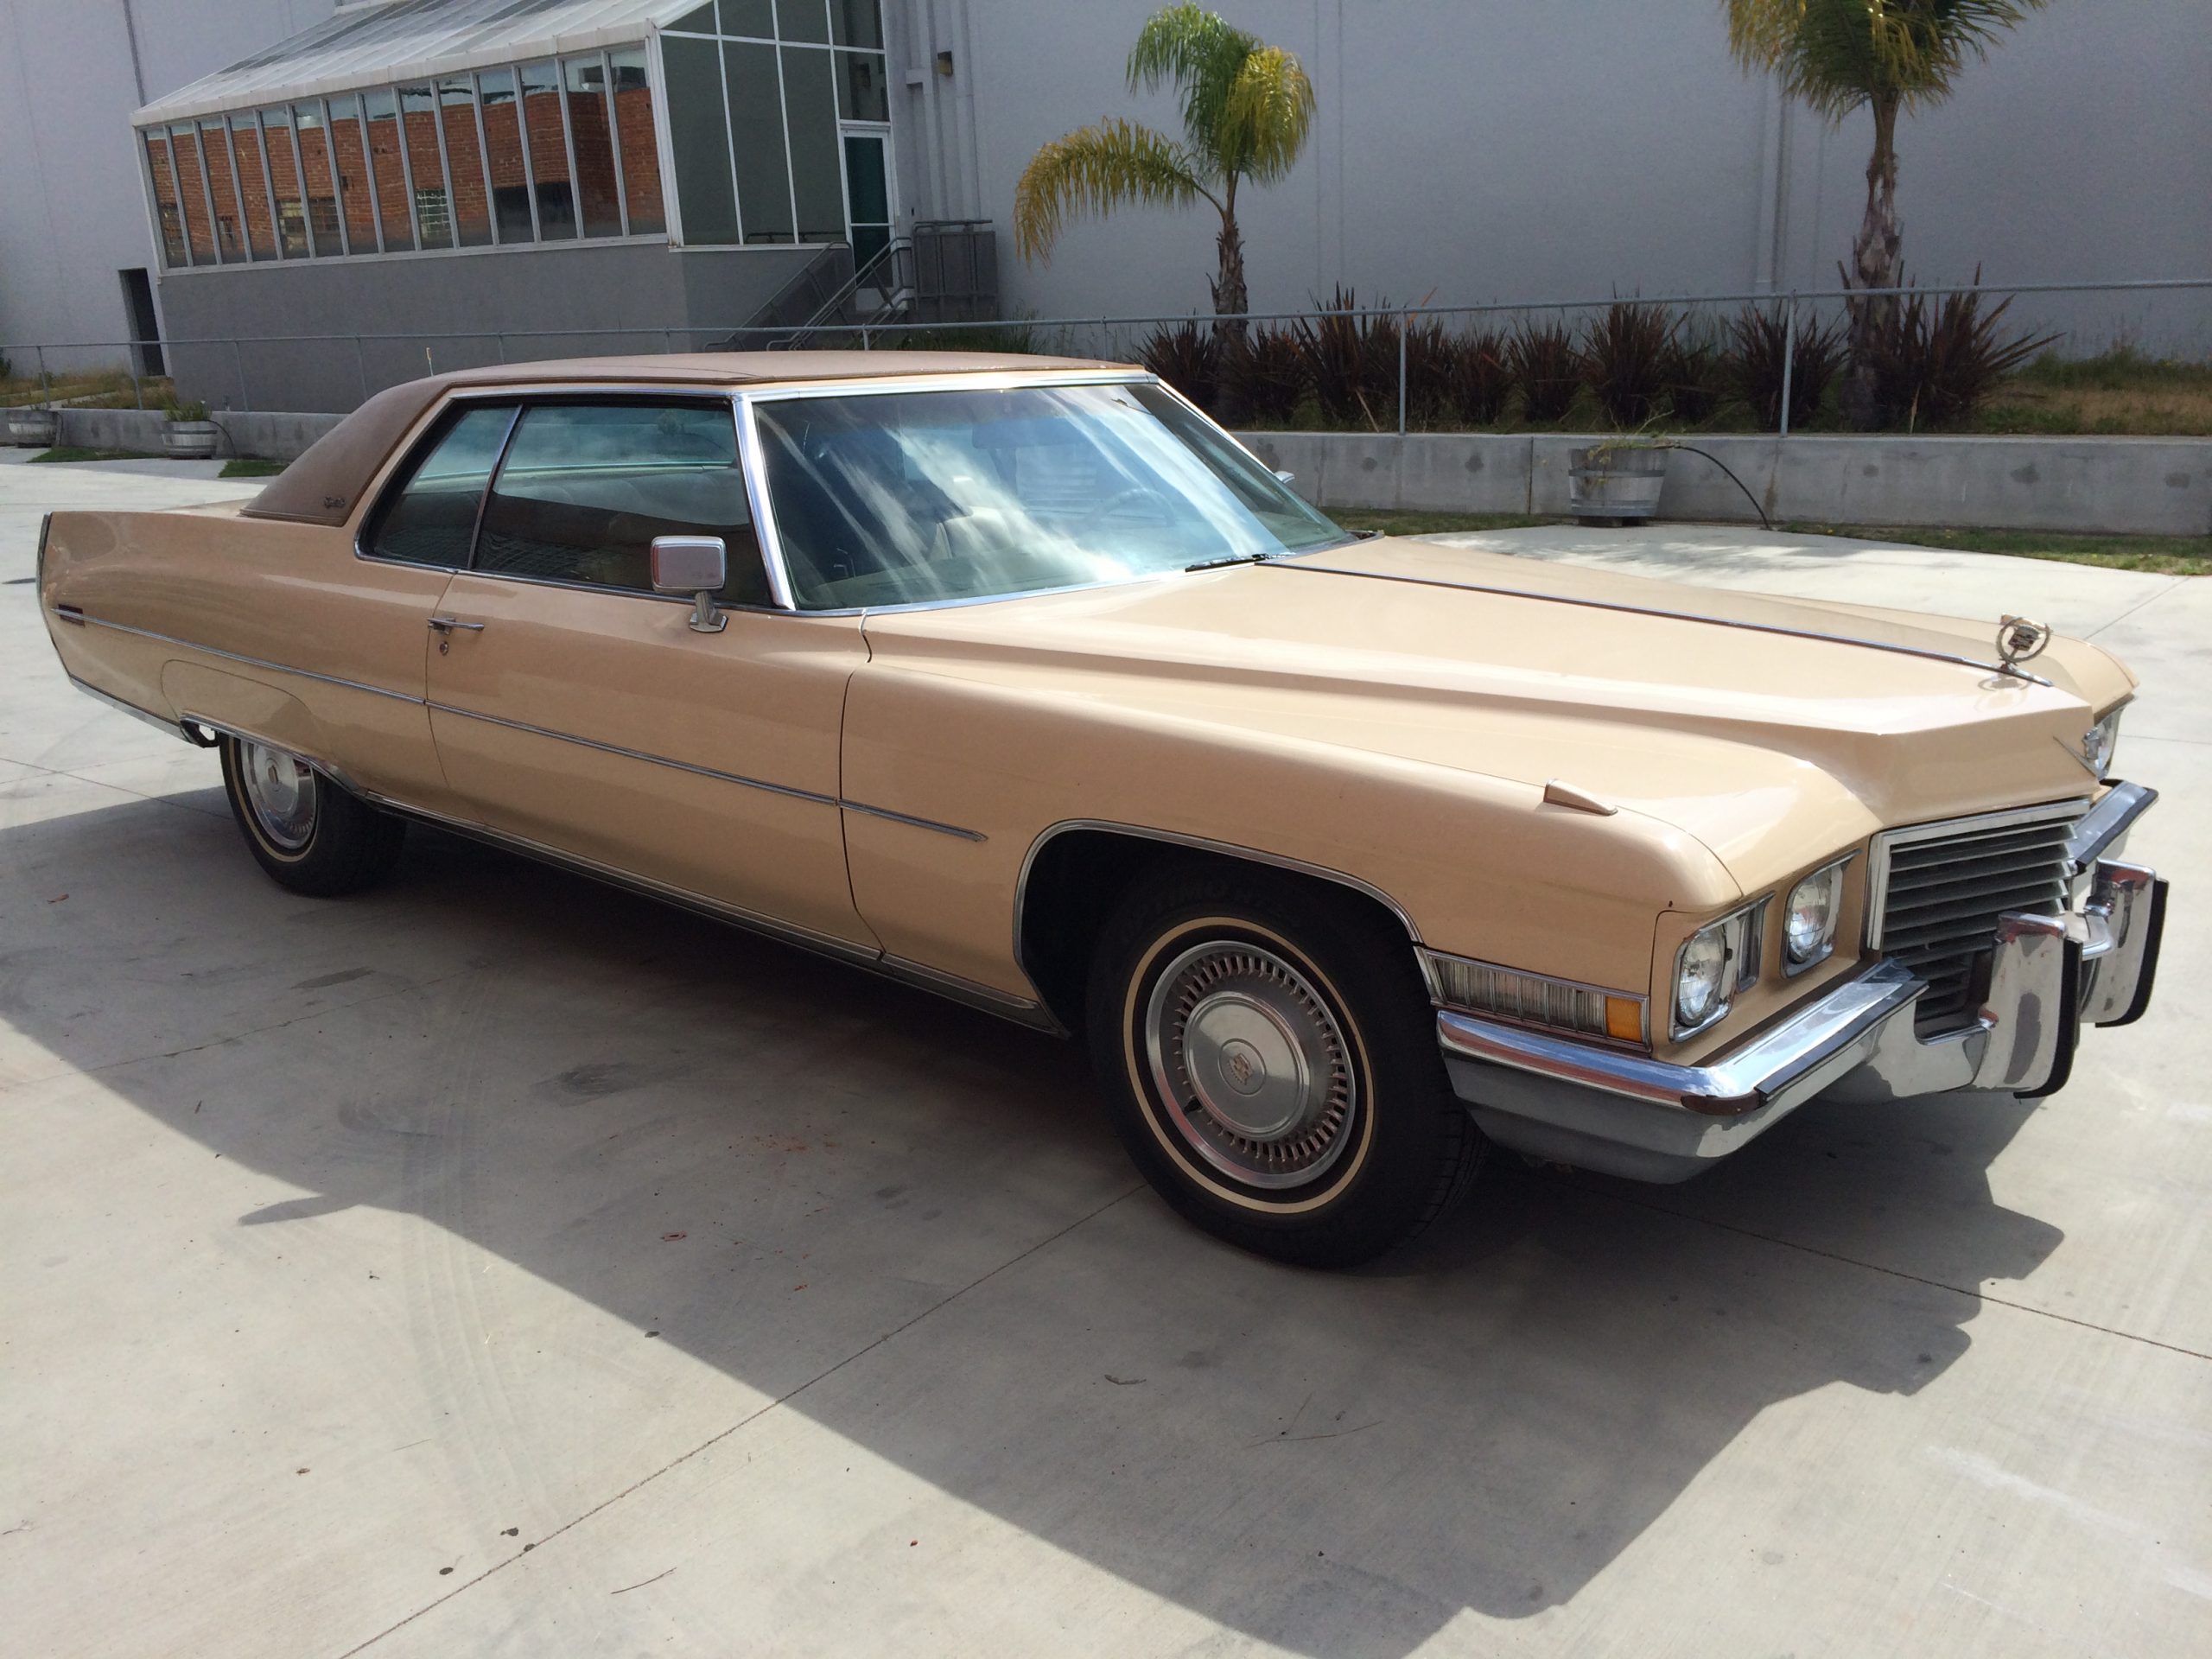 1972 Cadillac for rent